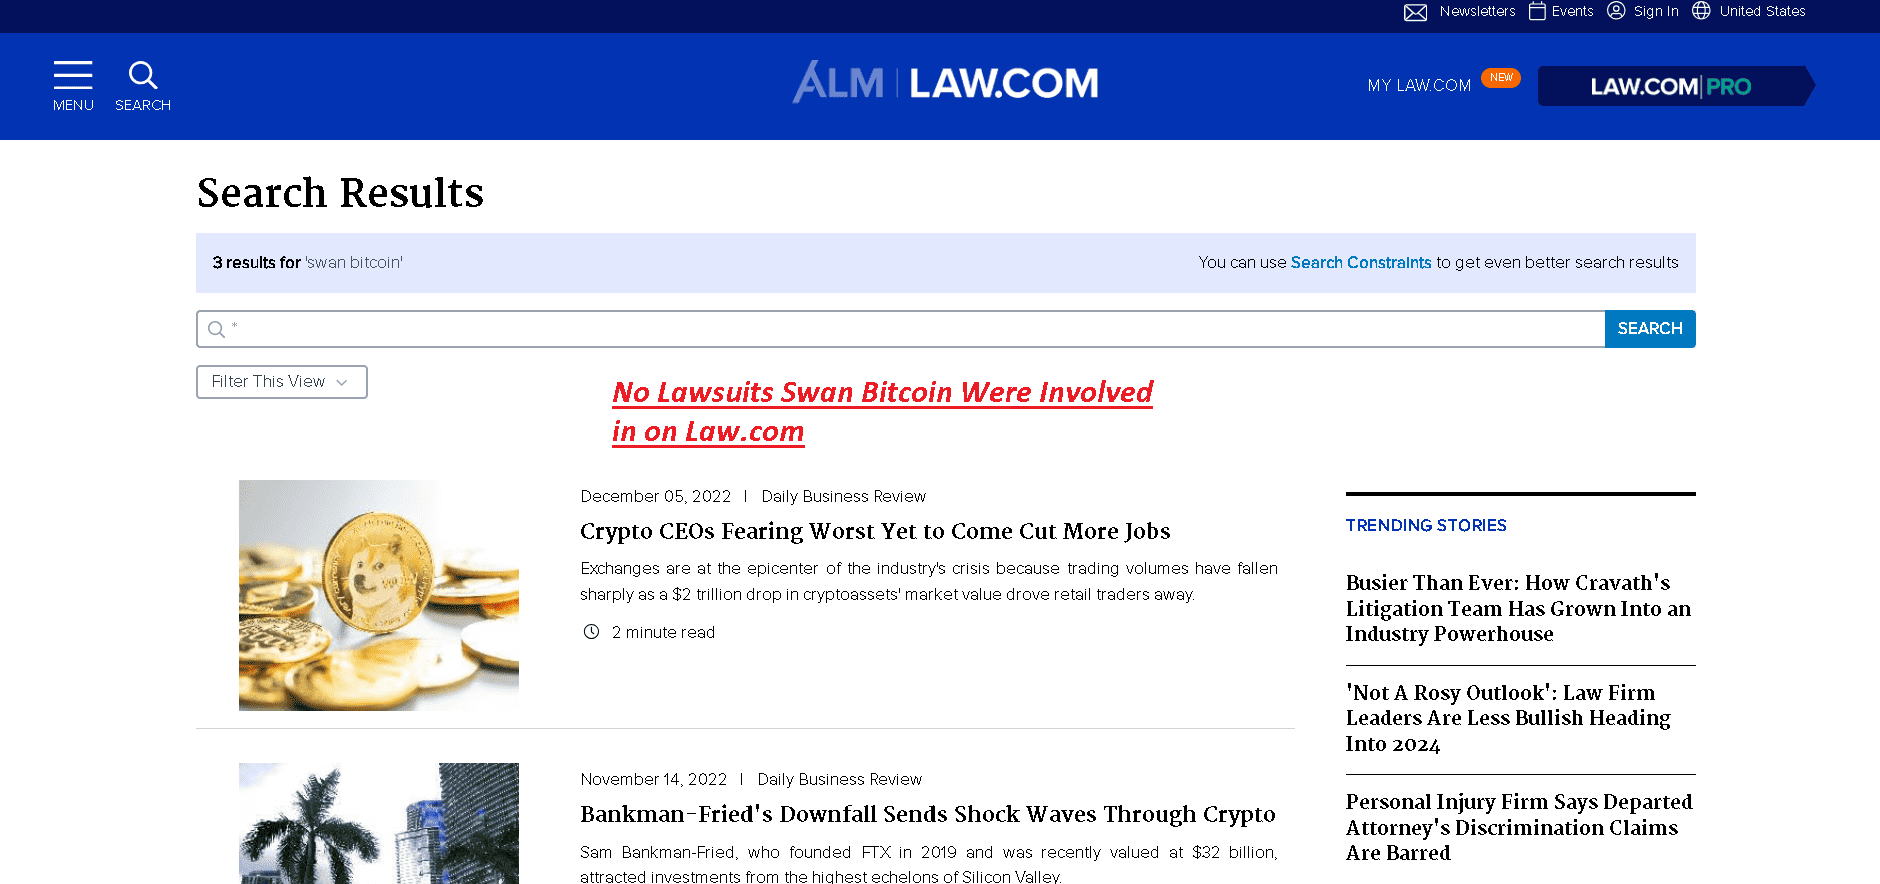 No lawsuits Swan Bitcoin were Involved in on Law.com